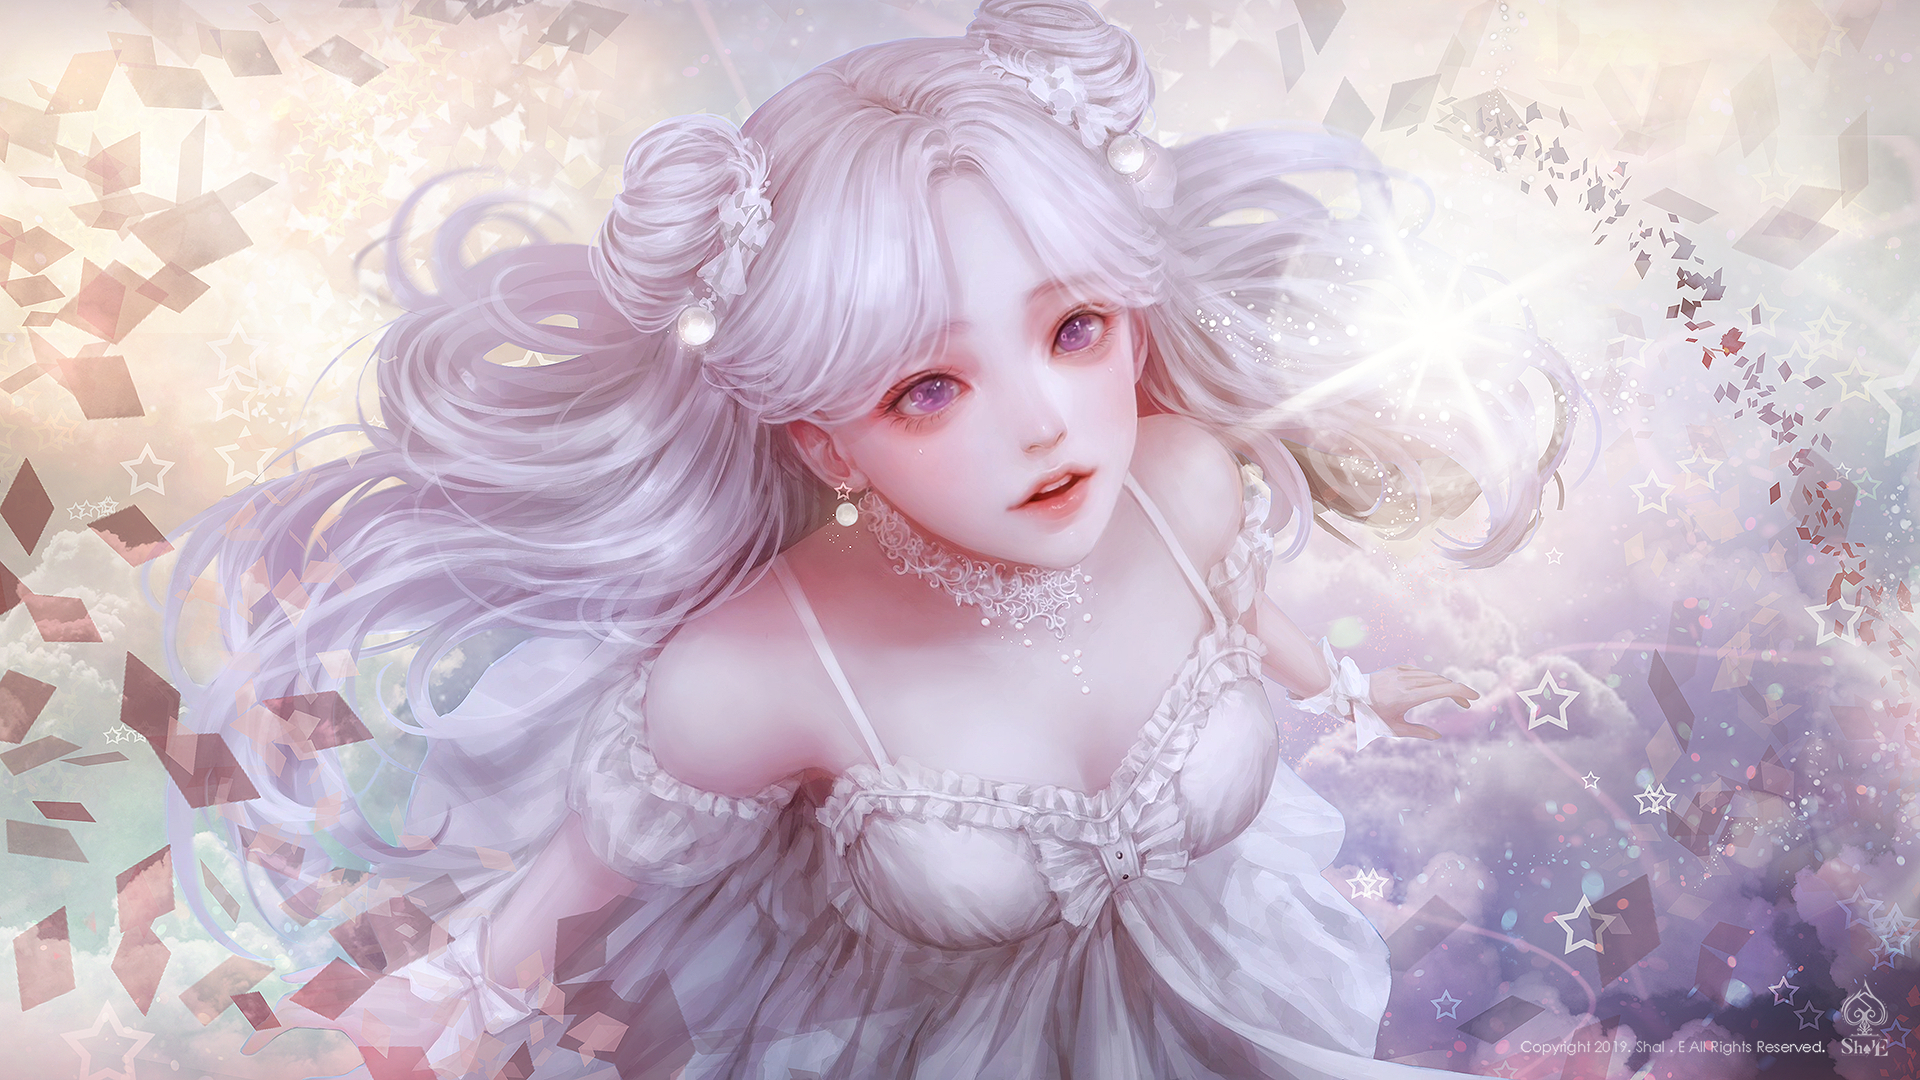 Anime 1920x1080 anime girls anime original characters white hair long hair portrait dress white dress top view looking up necklace artwork digital art drawing Shal E